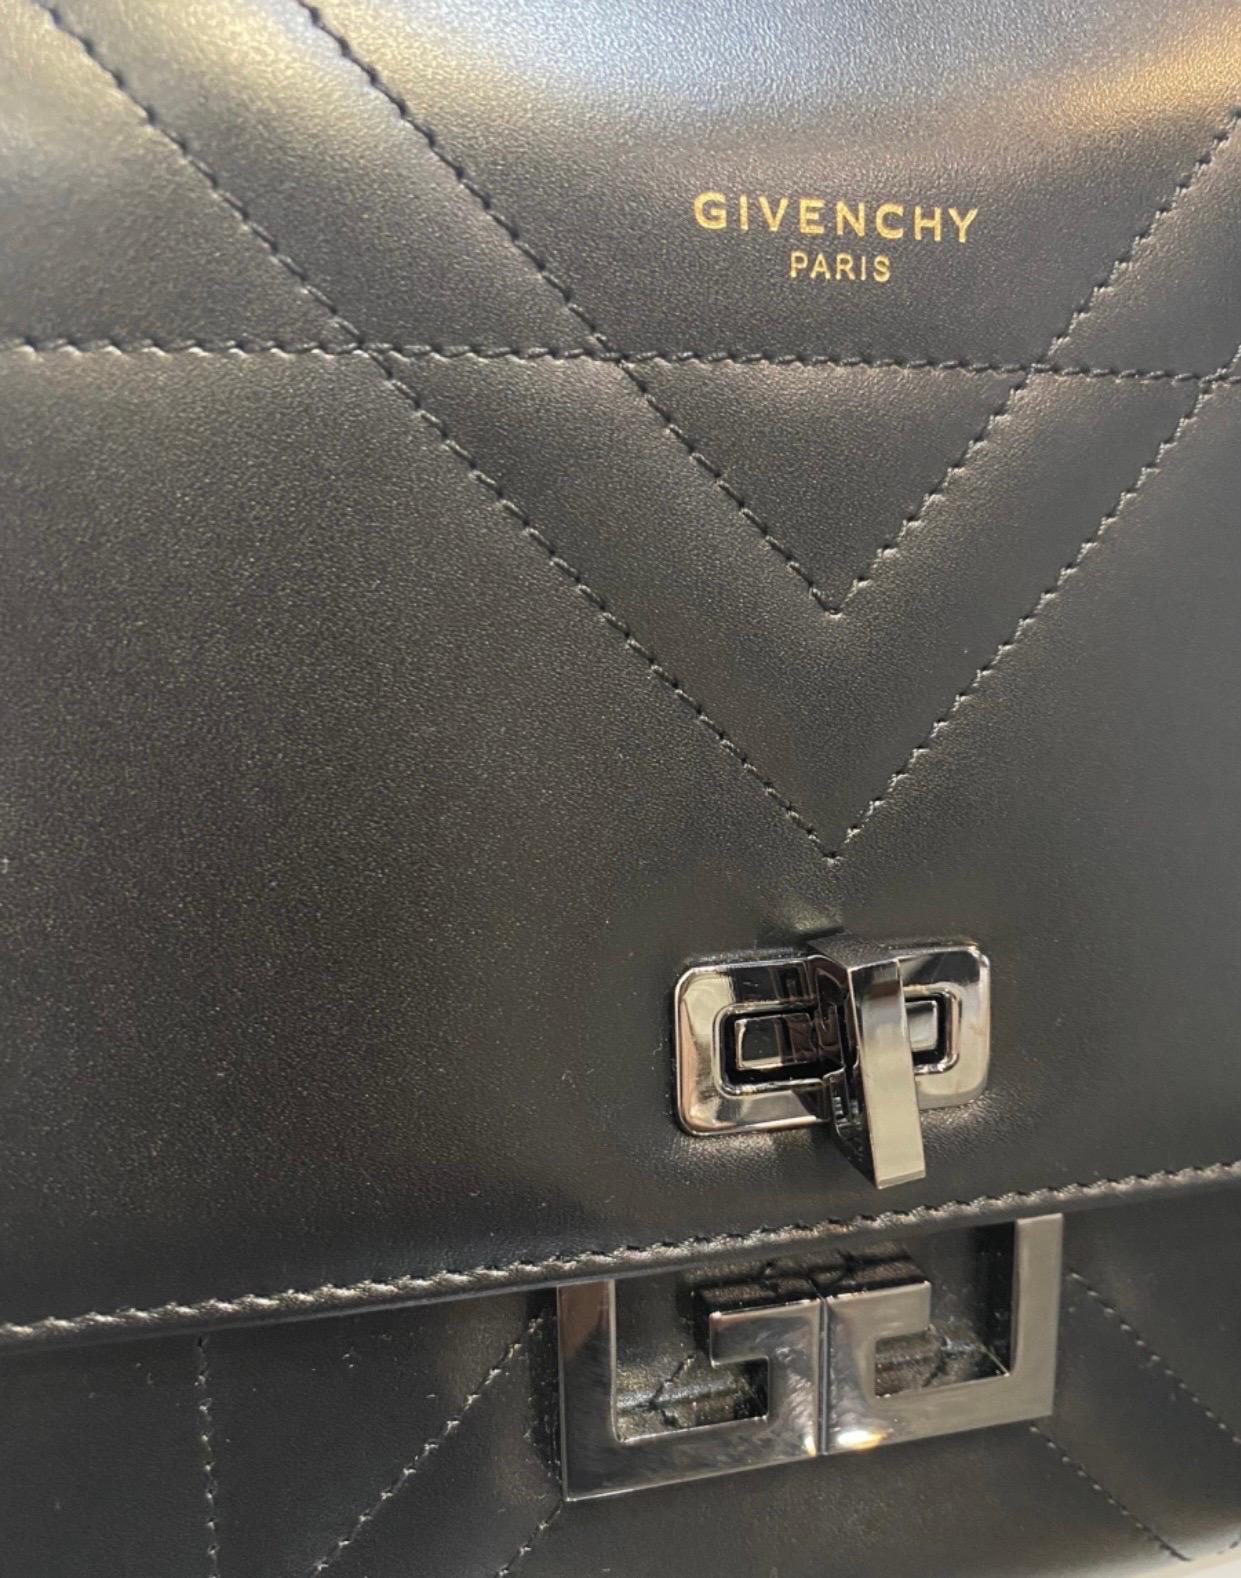 Givenchy Eden bag. 
in black leather and silver hardware.
measurements:
height 20 cm
length 24 cm
width 9 cm
the shoulder strap can be extended up to 53 cm. Excellent overall condition but has a scratch on the back as shown in the photo. and some